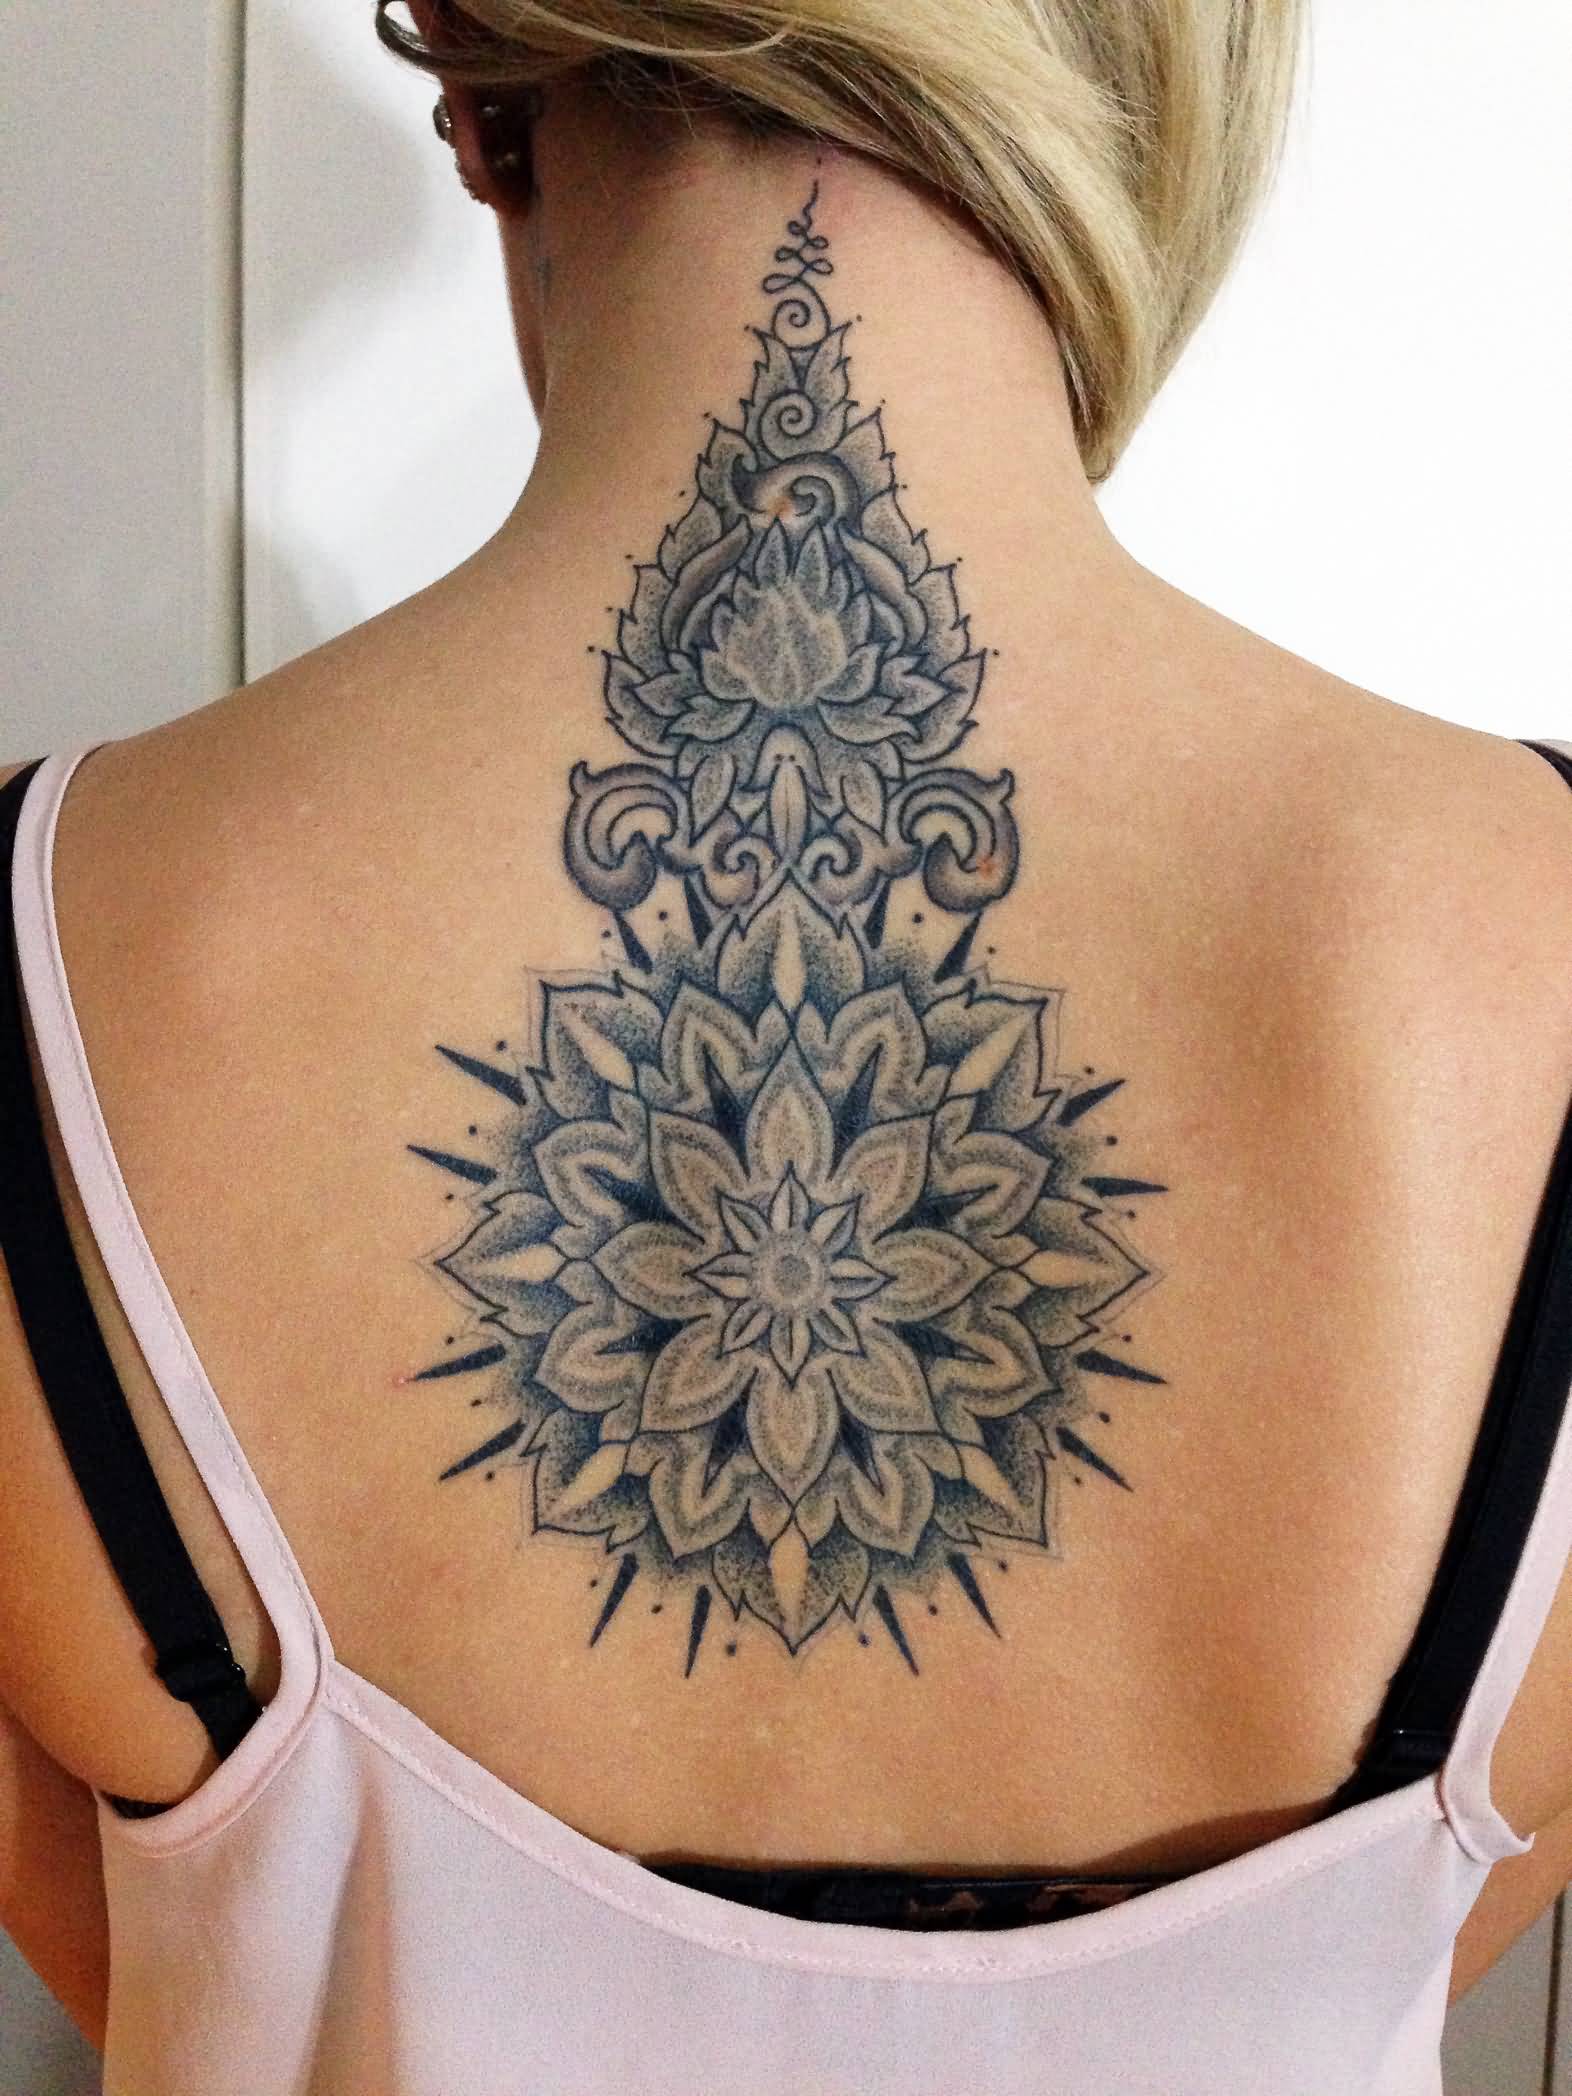 50 Stunning Spine Tattoo Ideas That Will Make You Want To Get Inked |  DeMilked